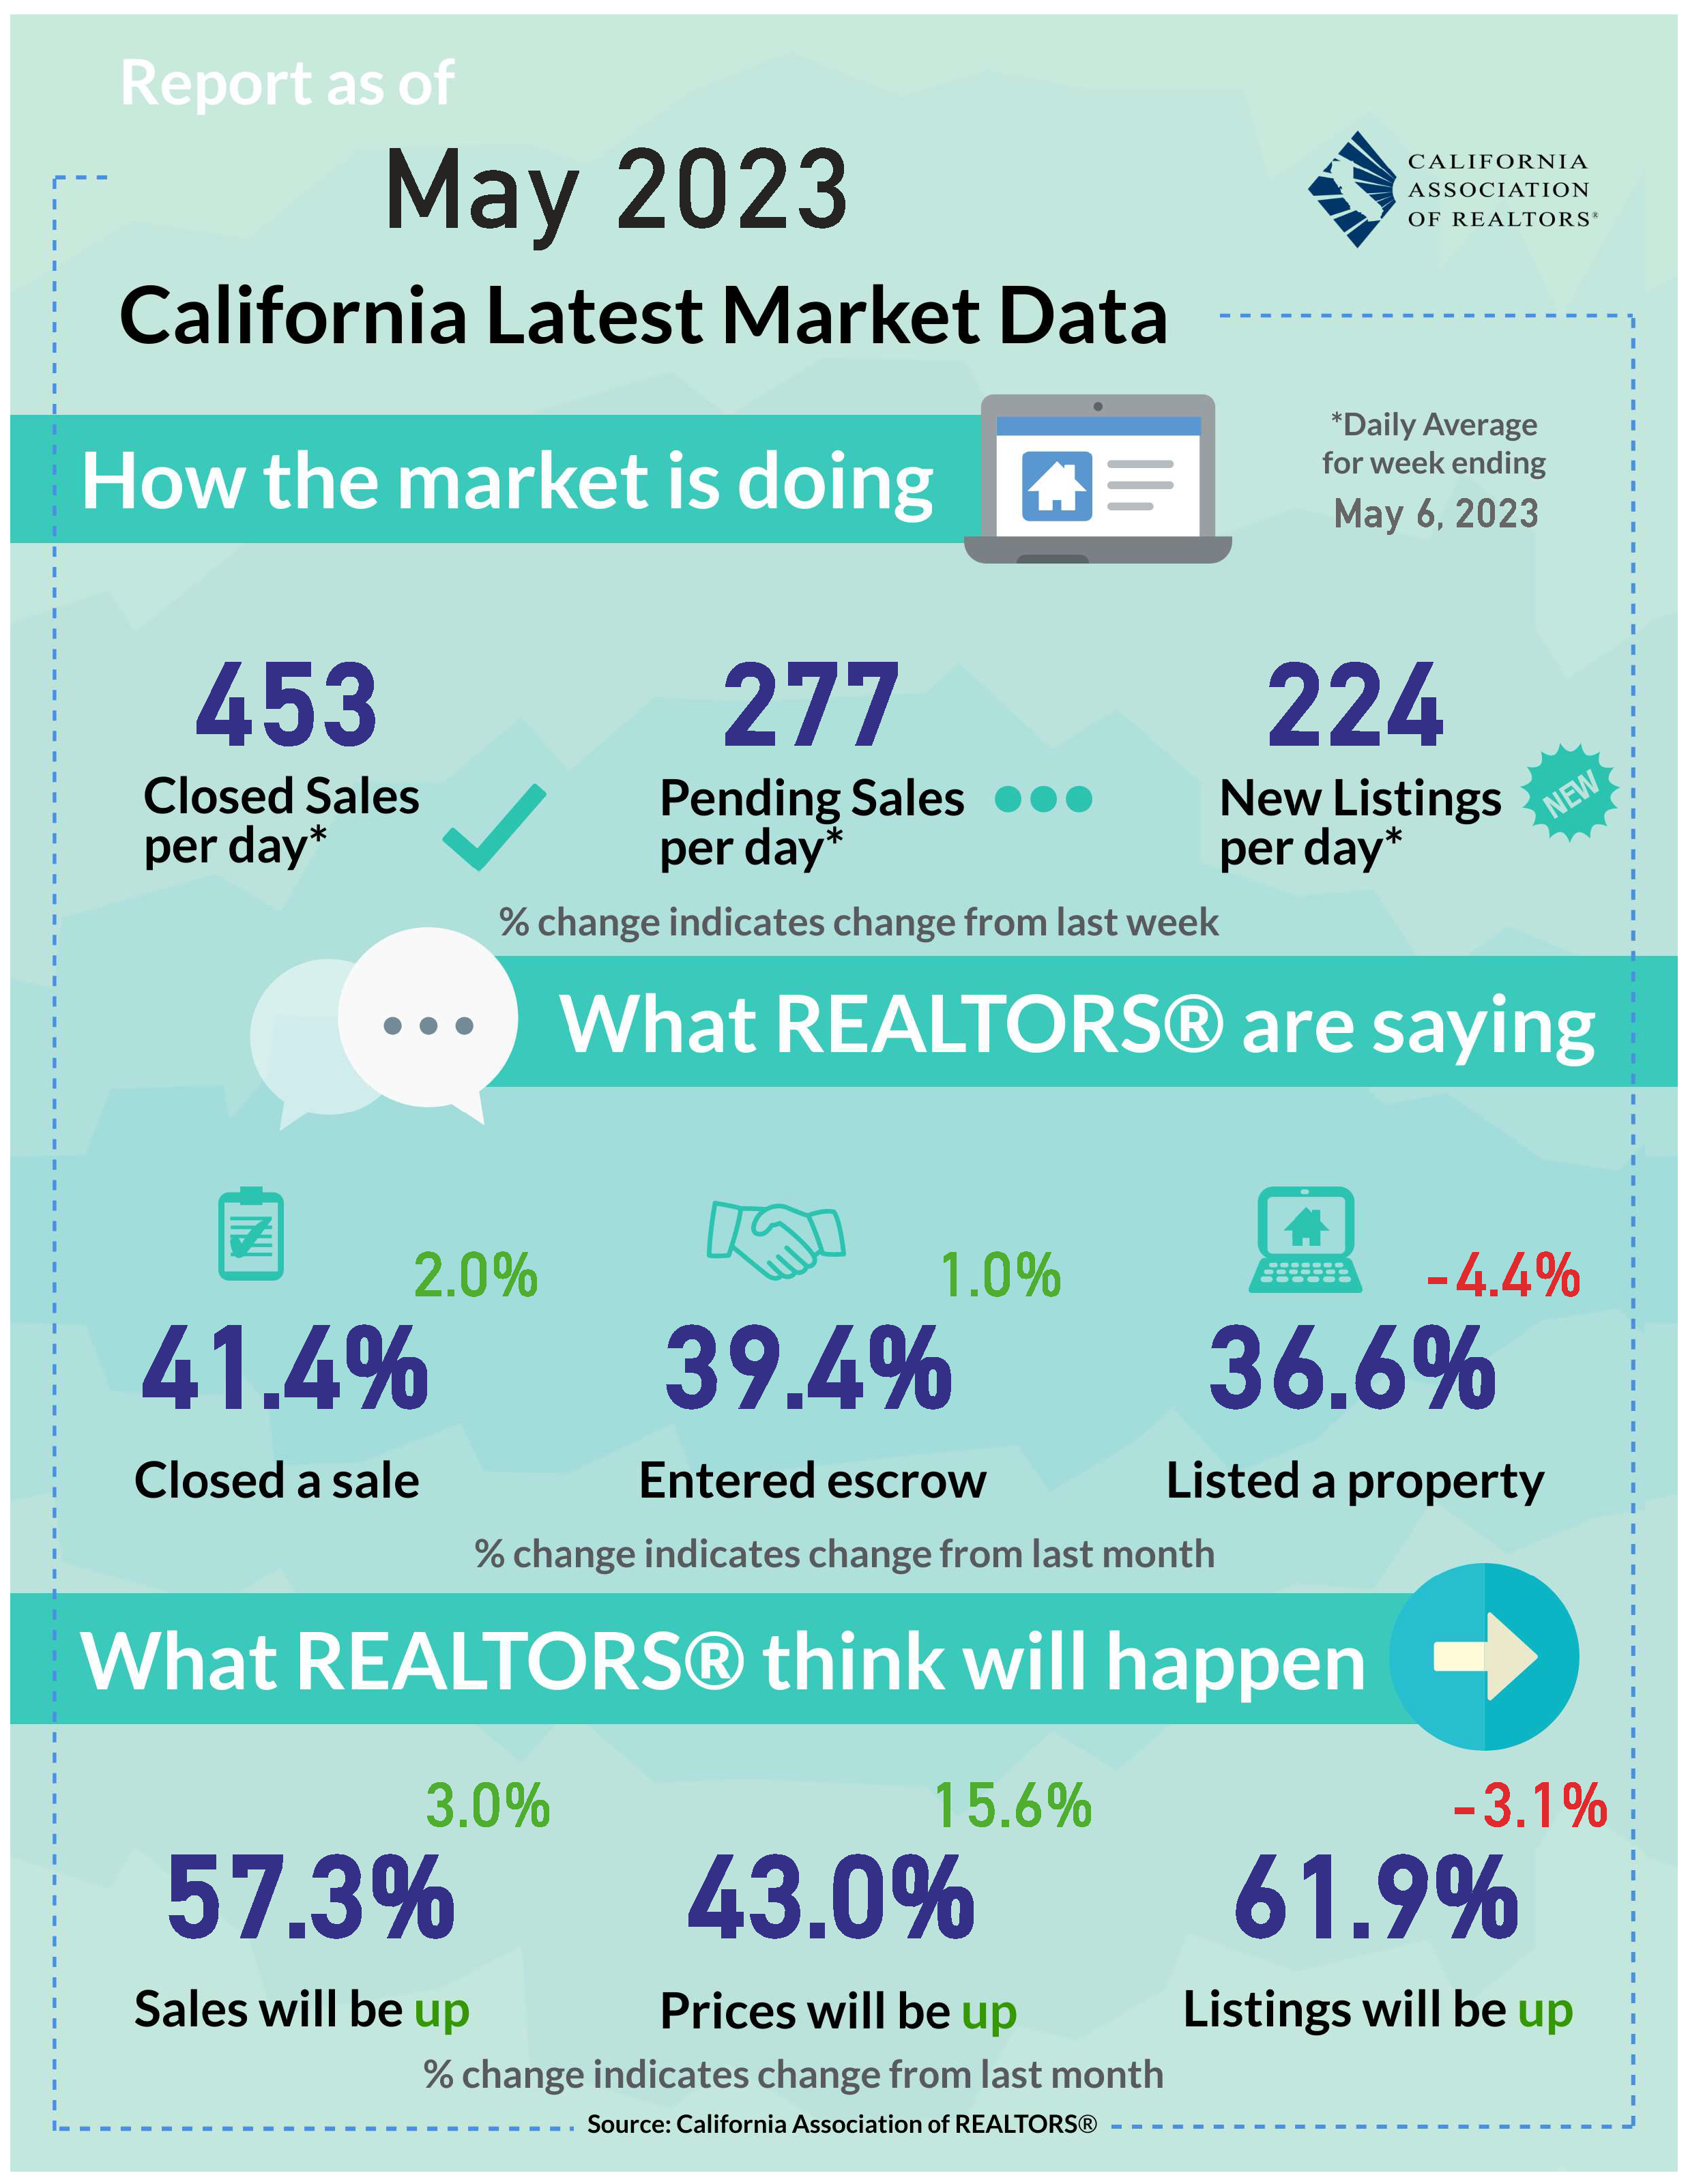 California Housing Market Improving Slowly But Faces Tight Inventory Challenge